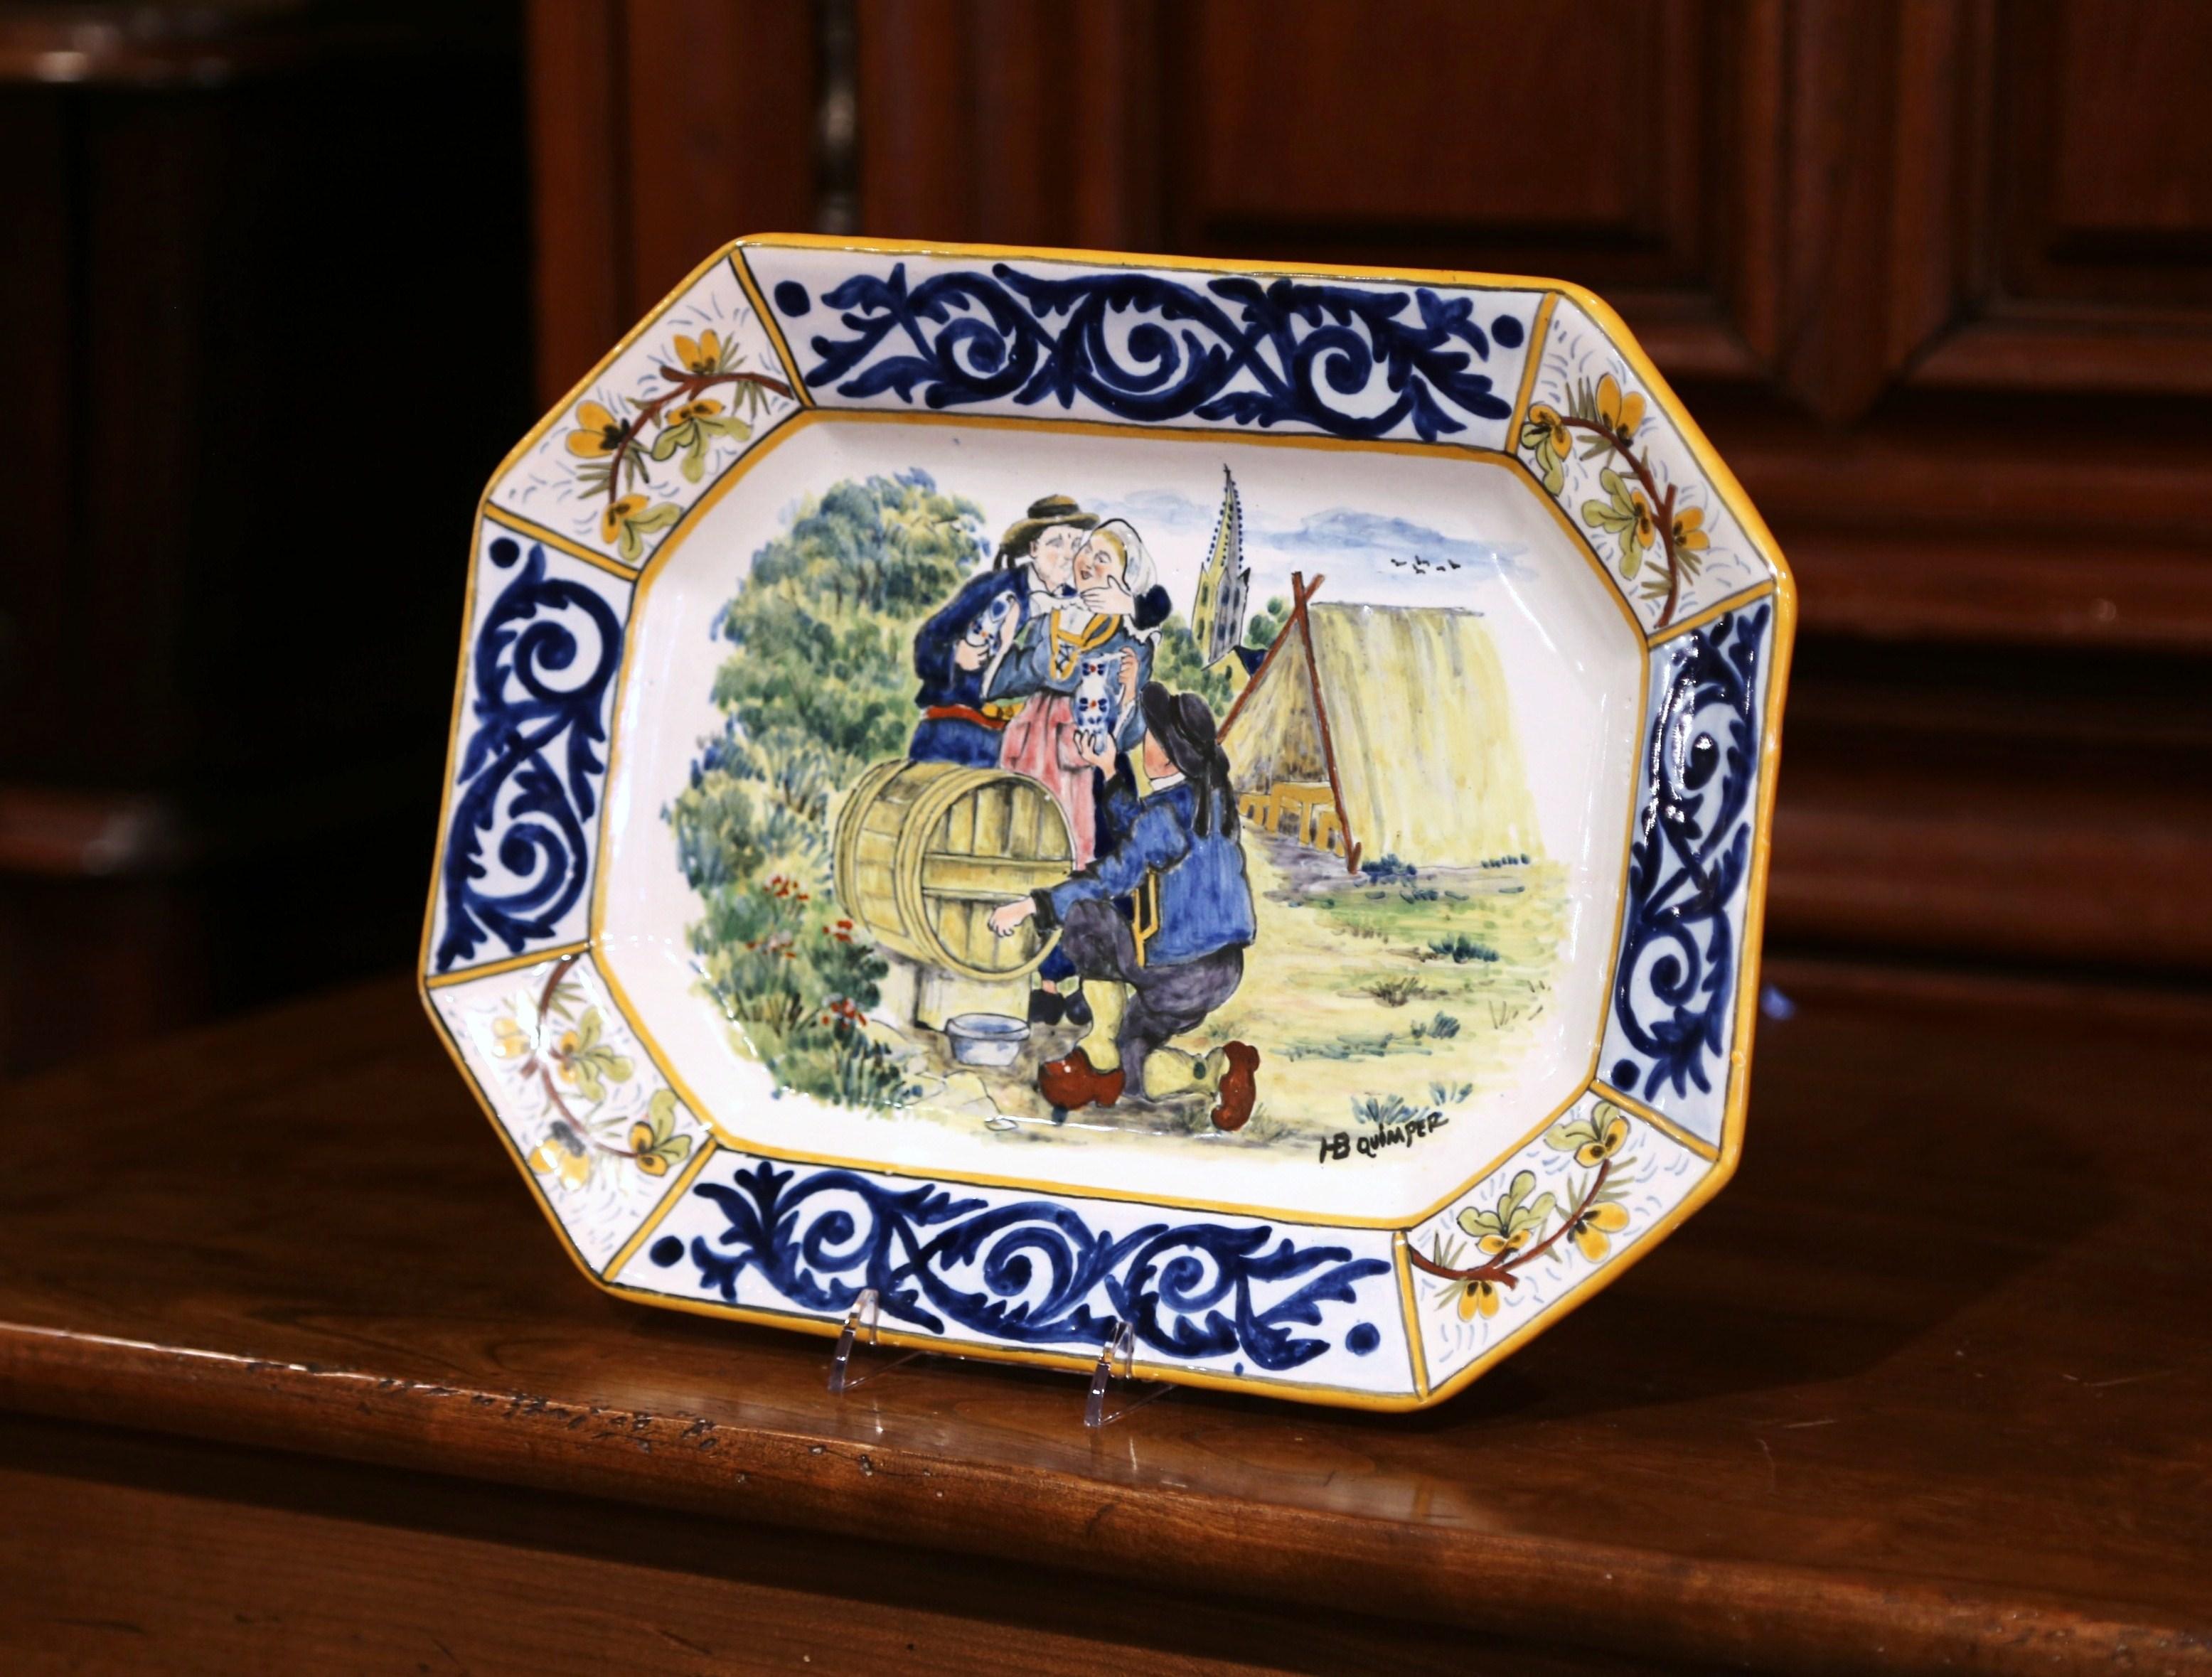 Decorate a wall of a shelf with this colorful antique platter; created in Brittany, France circa 1920, the hand painted ceramic plate features a happy drinking scene with wine maker handing pitcher to a woman while she being kissed by a man. The